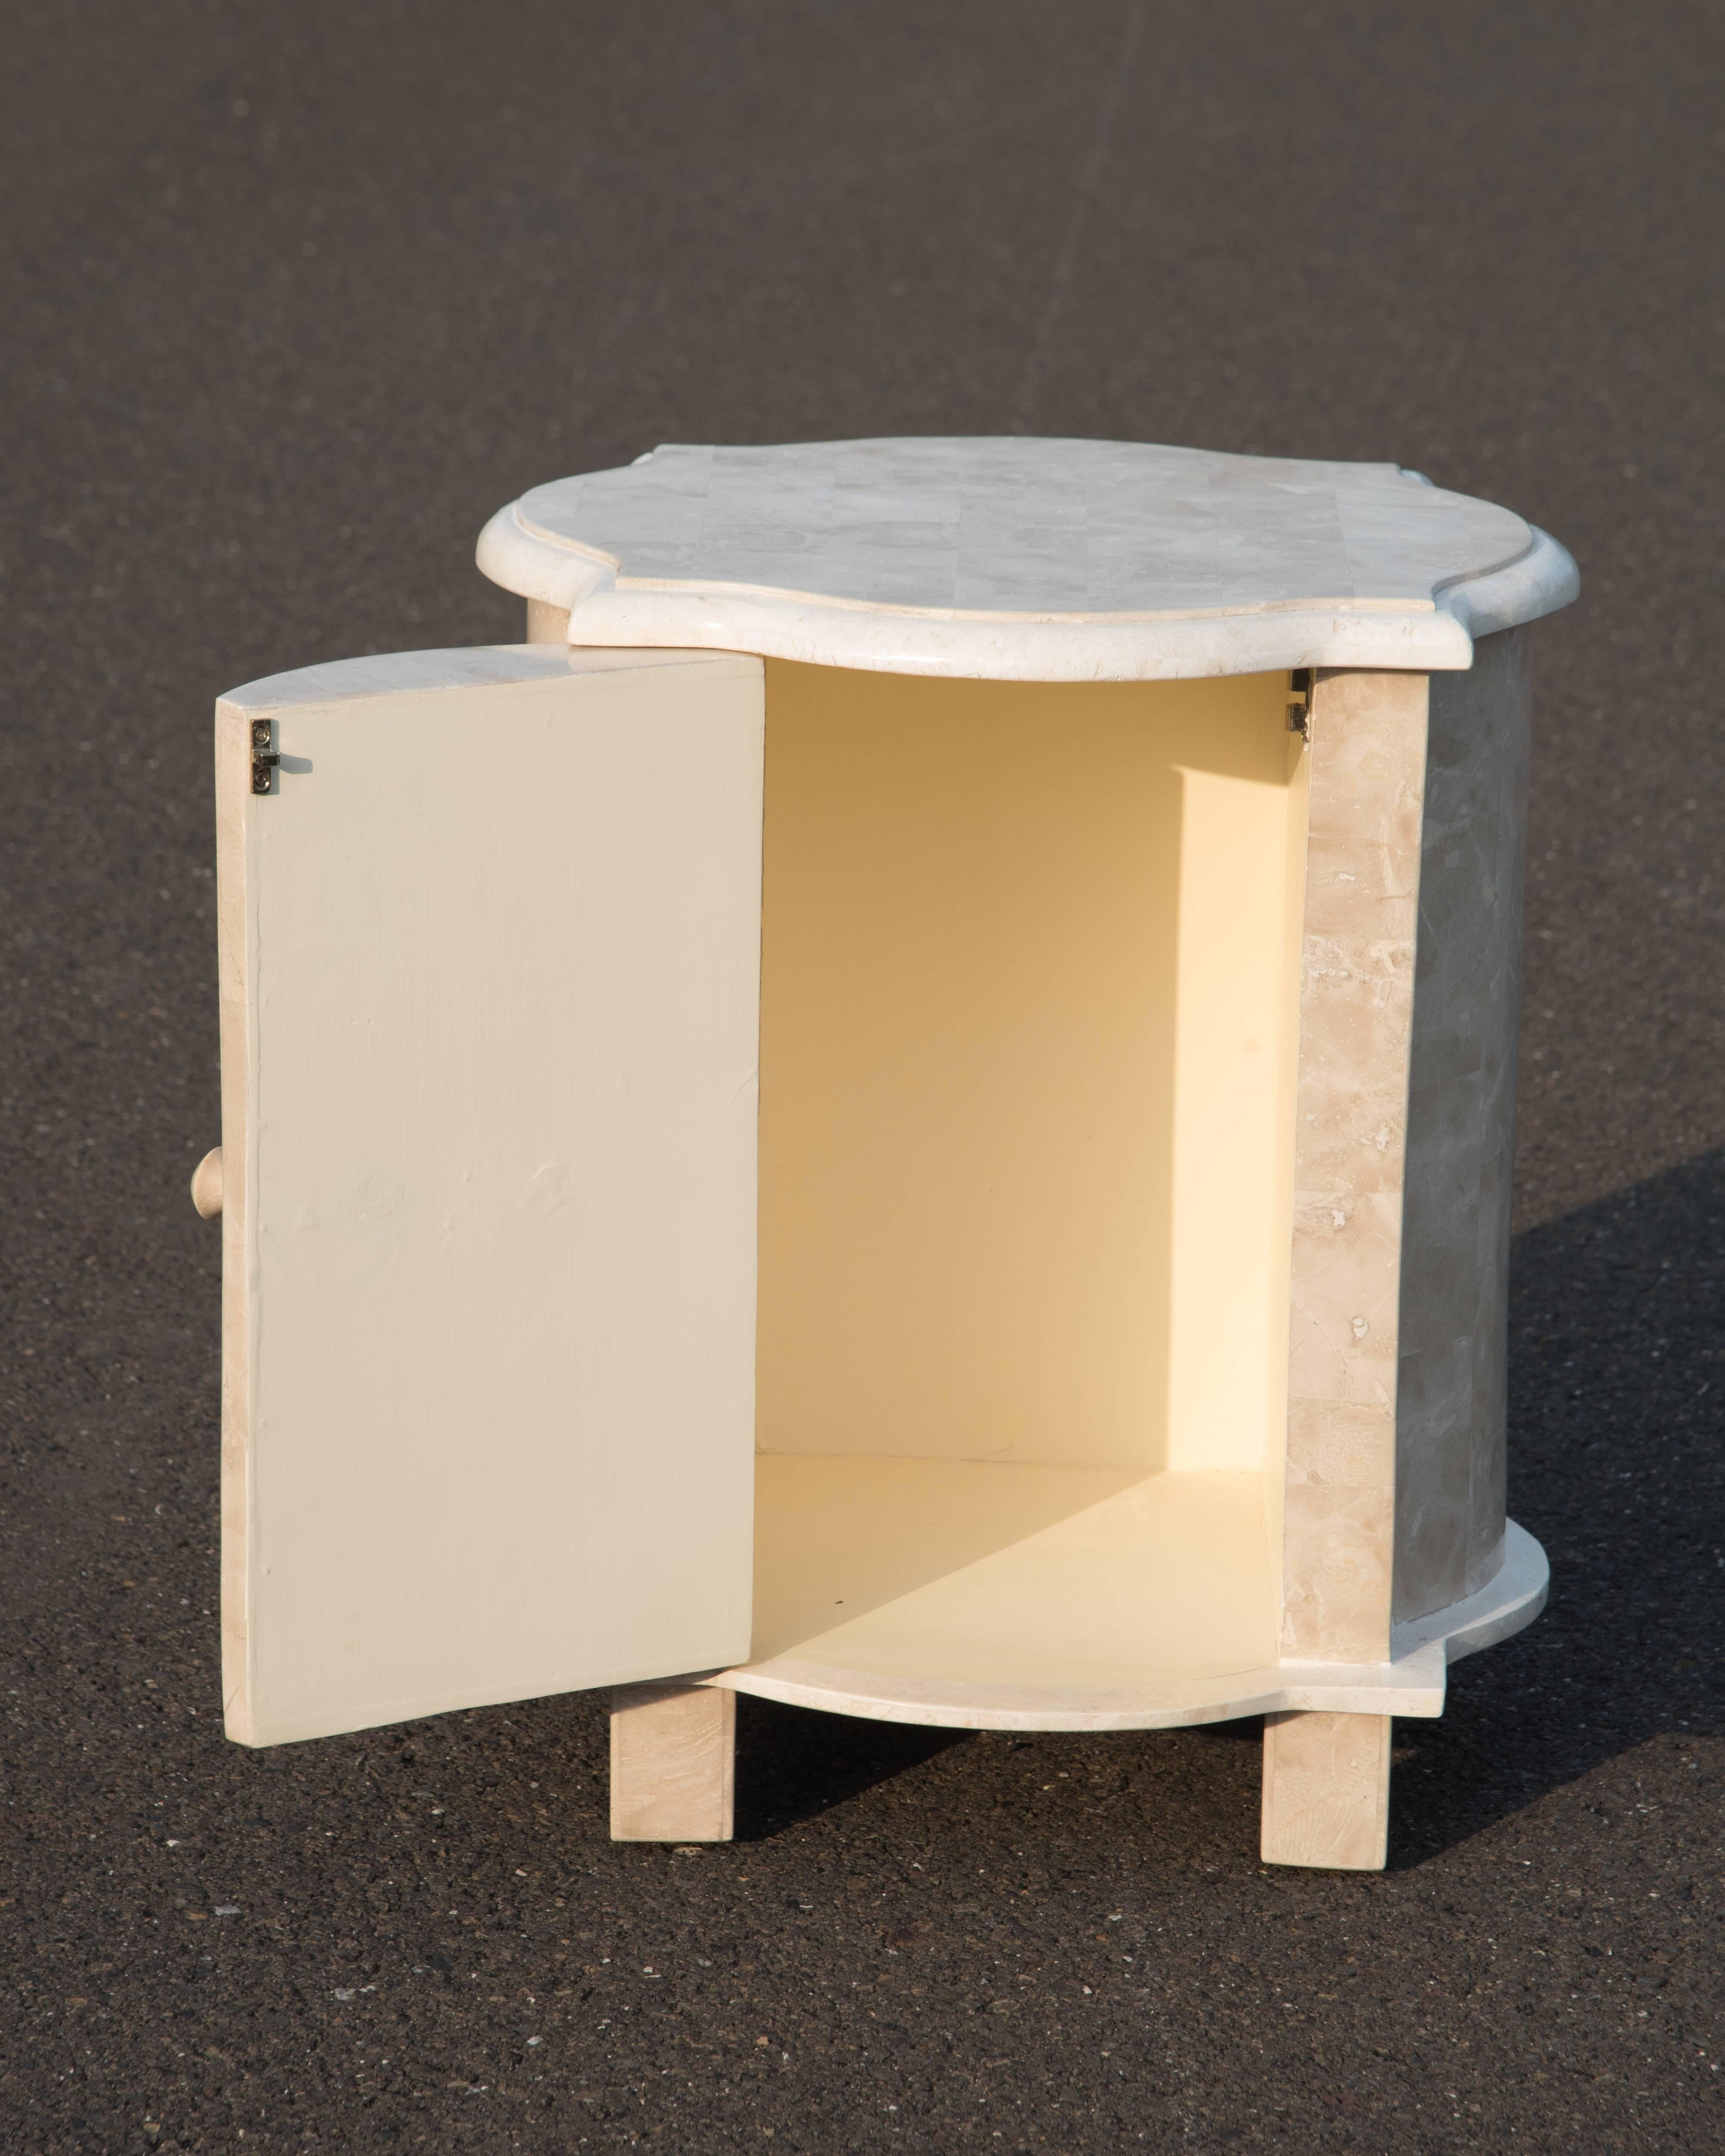 Two elegant beautifully crafted tessellated stone veneer end tables or night stands, one is a round drum shape trimmed with a brass ring at the base (measures H 25
diameter 19); the other has a Moorish design with single door which opens to storage.